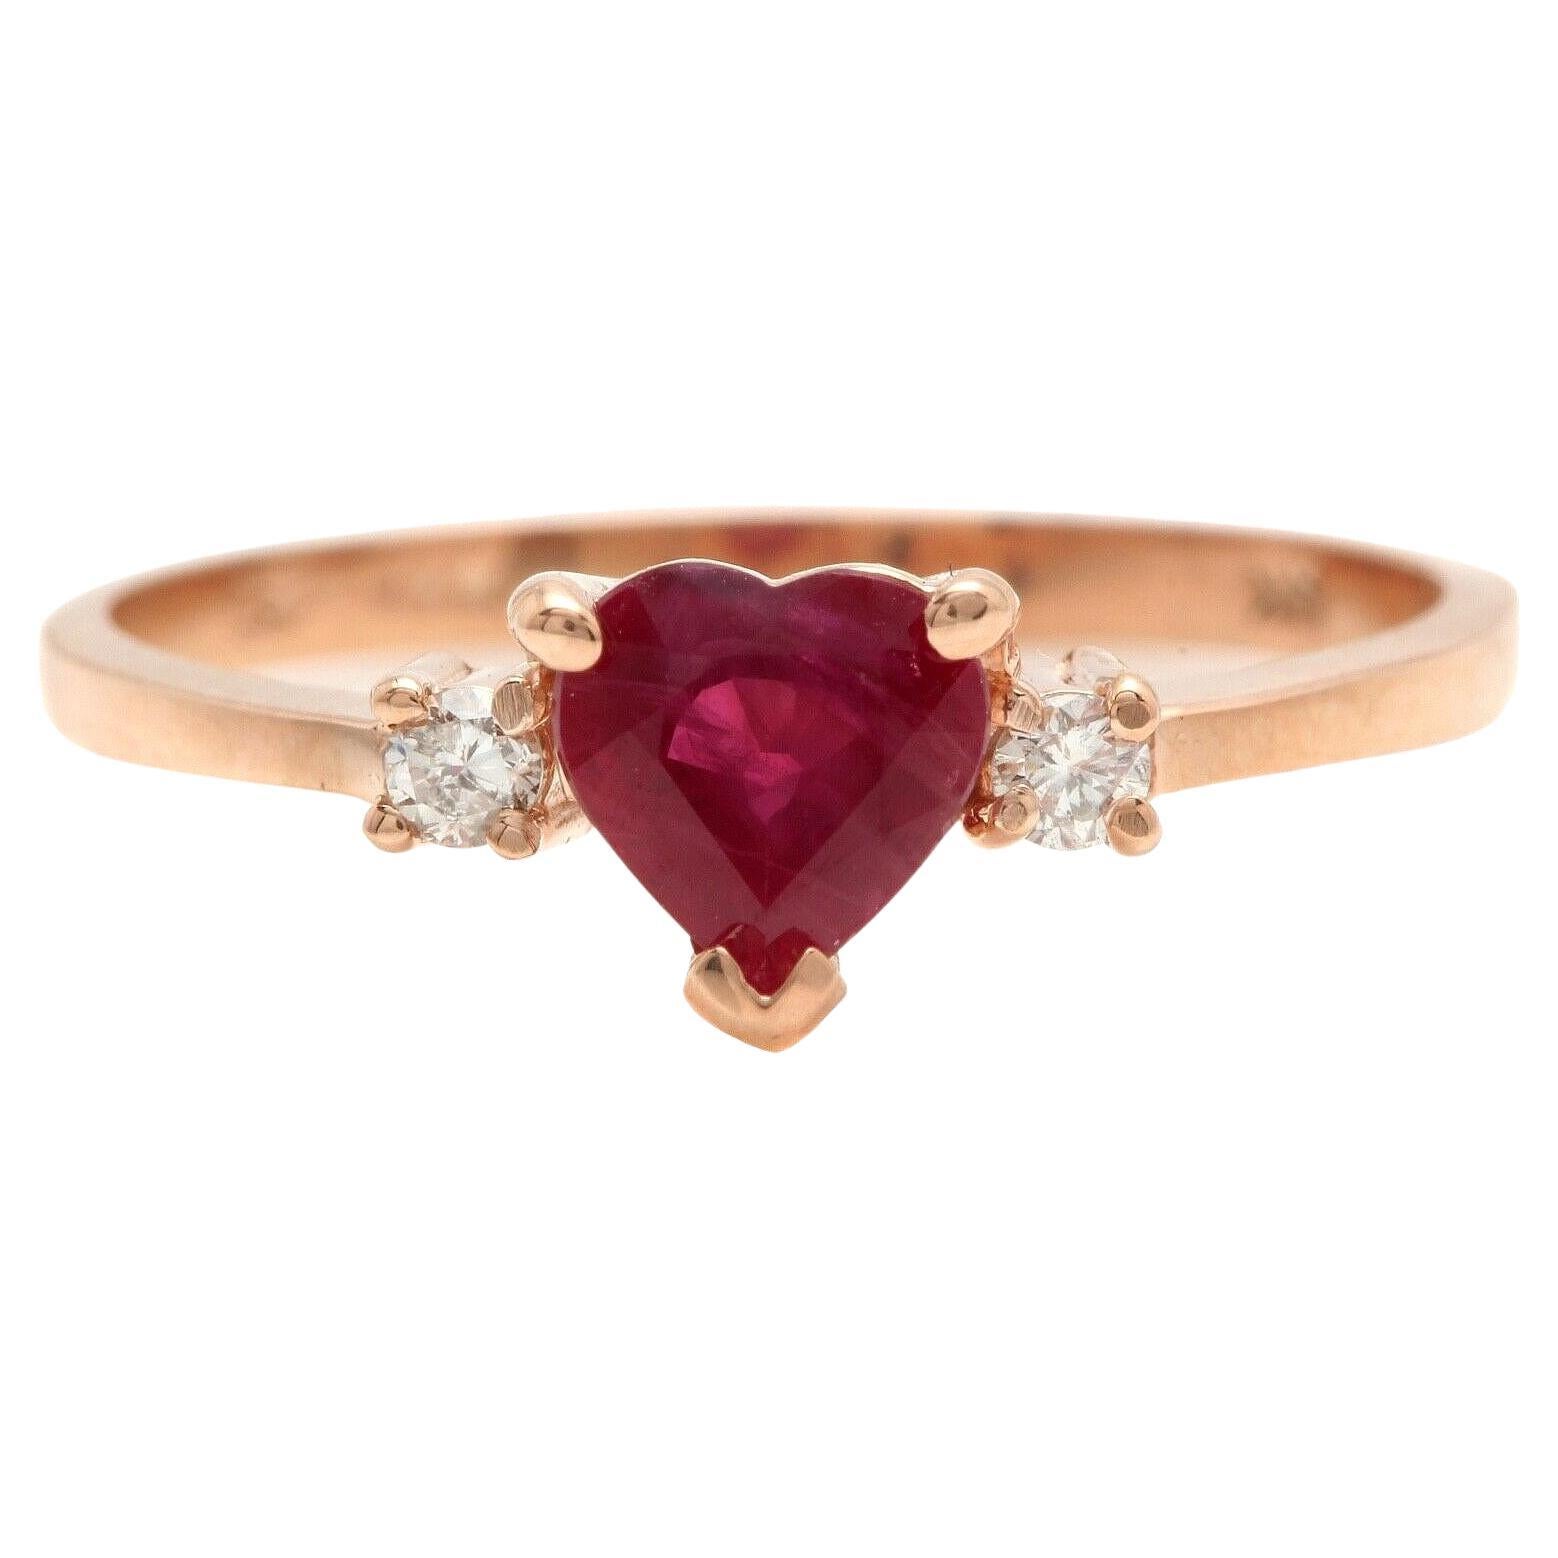 Natural Burma Ruby and Diamond 14K Solid Rose Gold Heart Ring